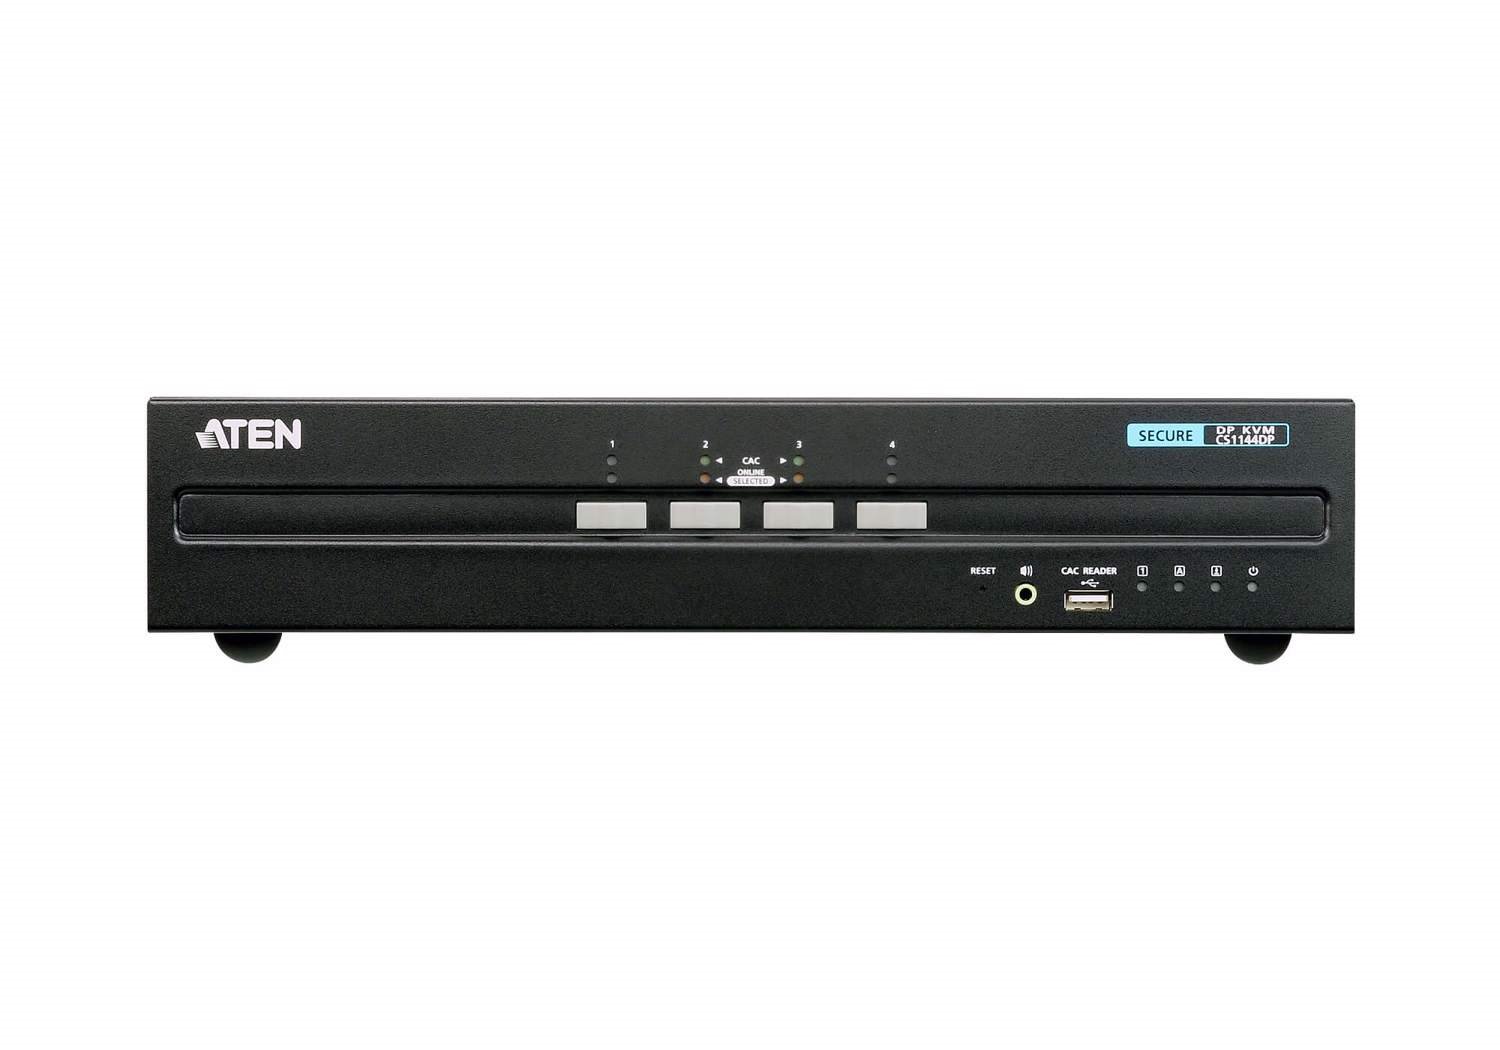 Aten 4-Port Usb DisplayPort Dual Display Secure KVM Switch (PSS PP V3.0 Compliant), Enable And Disable Cac Devices BY Port, With Cac Black